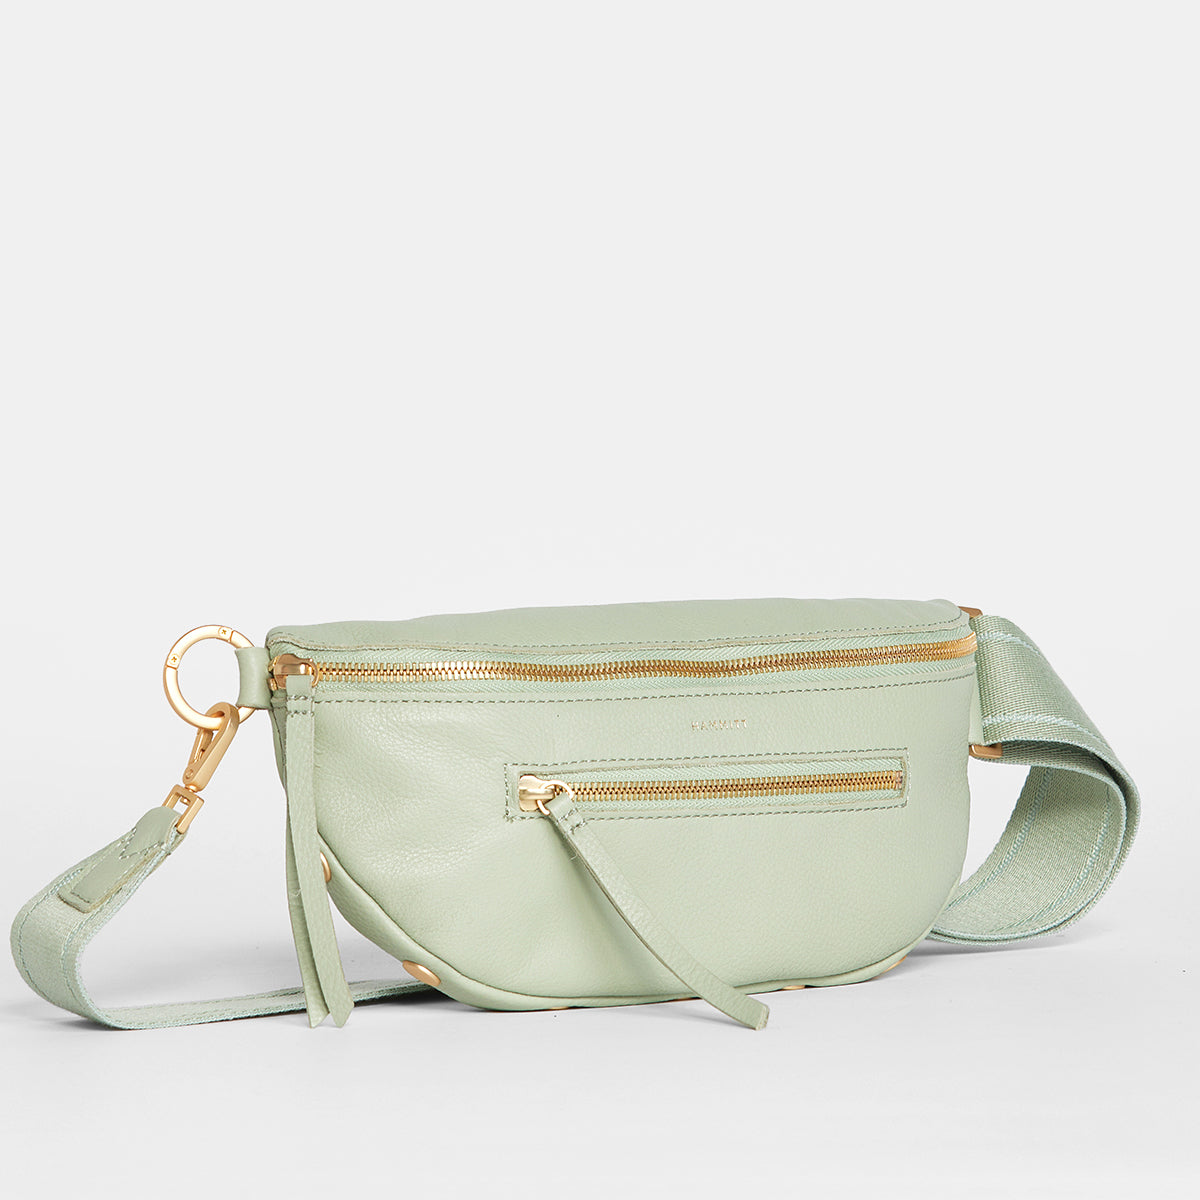 Charles-Crossbody-Med-Cypress-Sage-Front-View-2